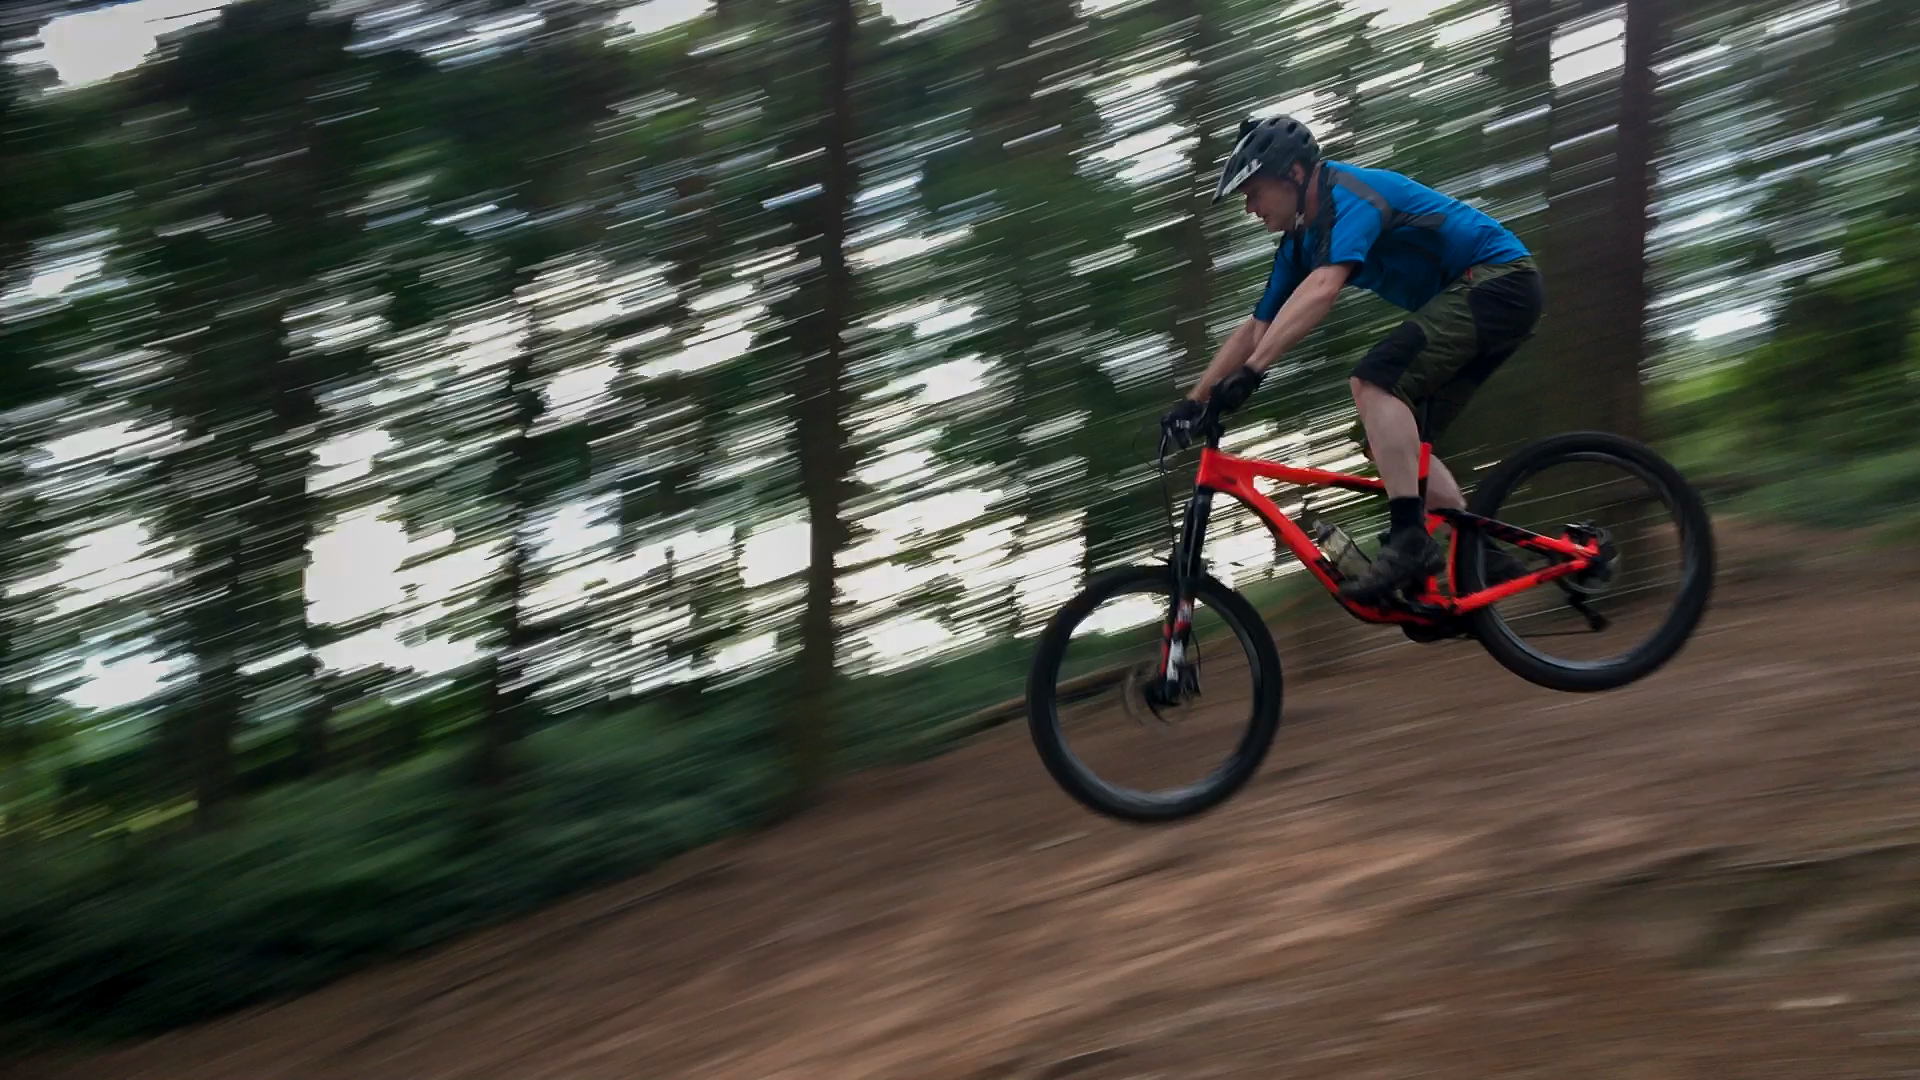 Ian jumping (and even landing it) at Delamere on the MTB Club ride